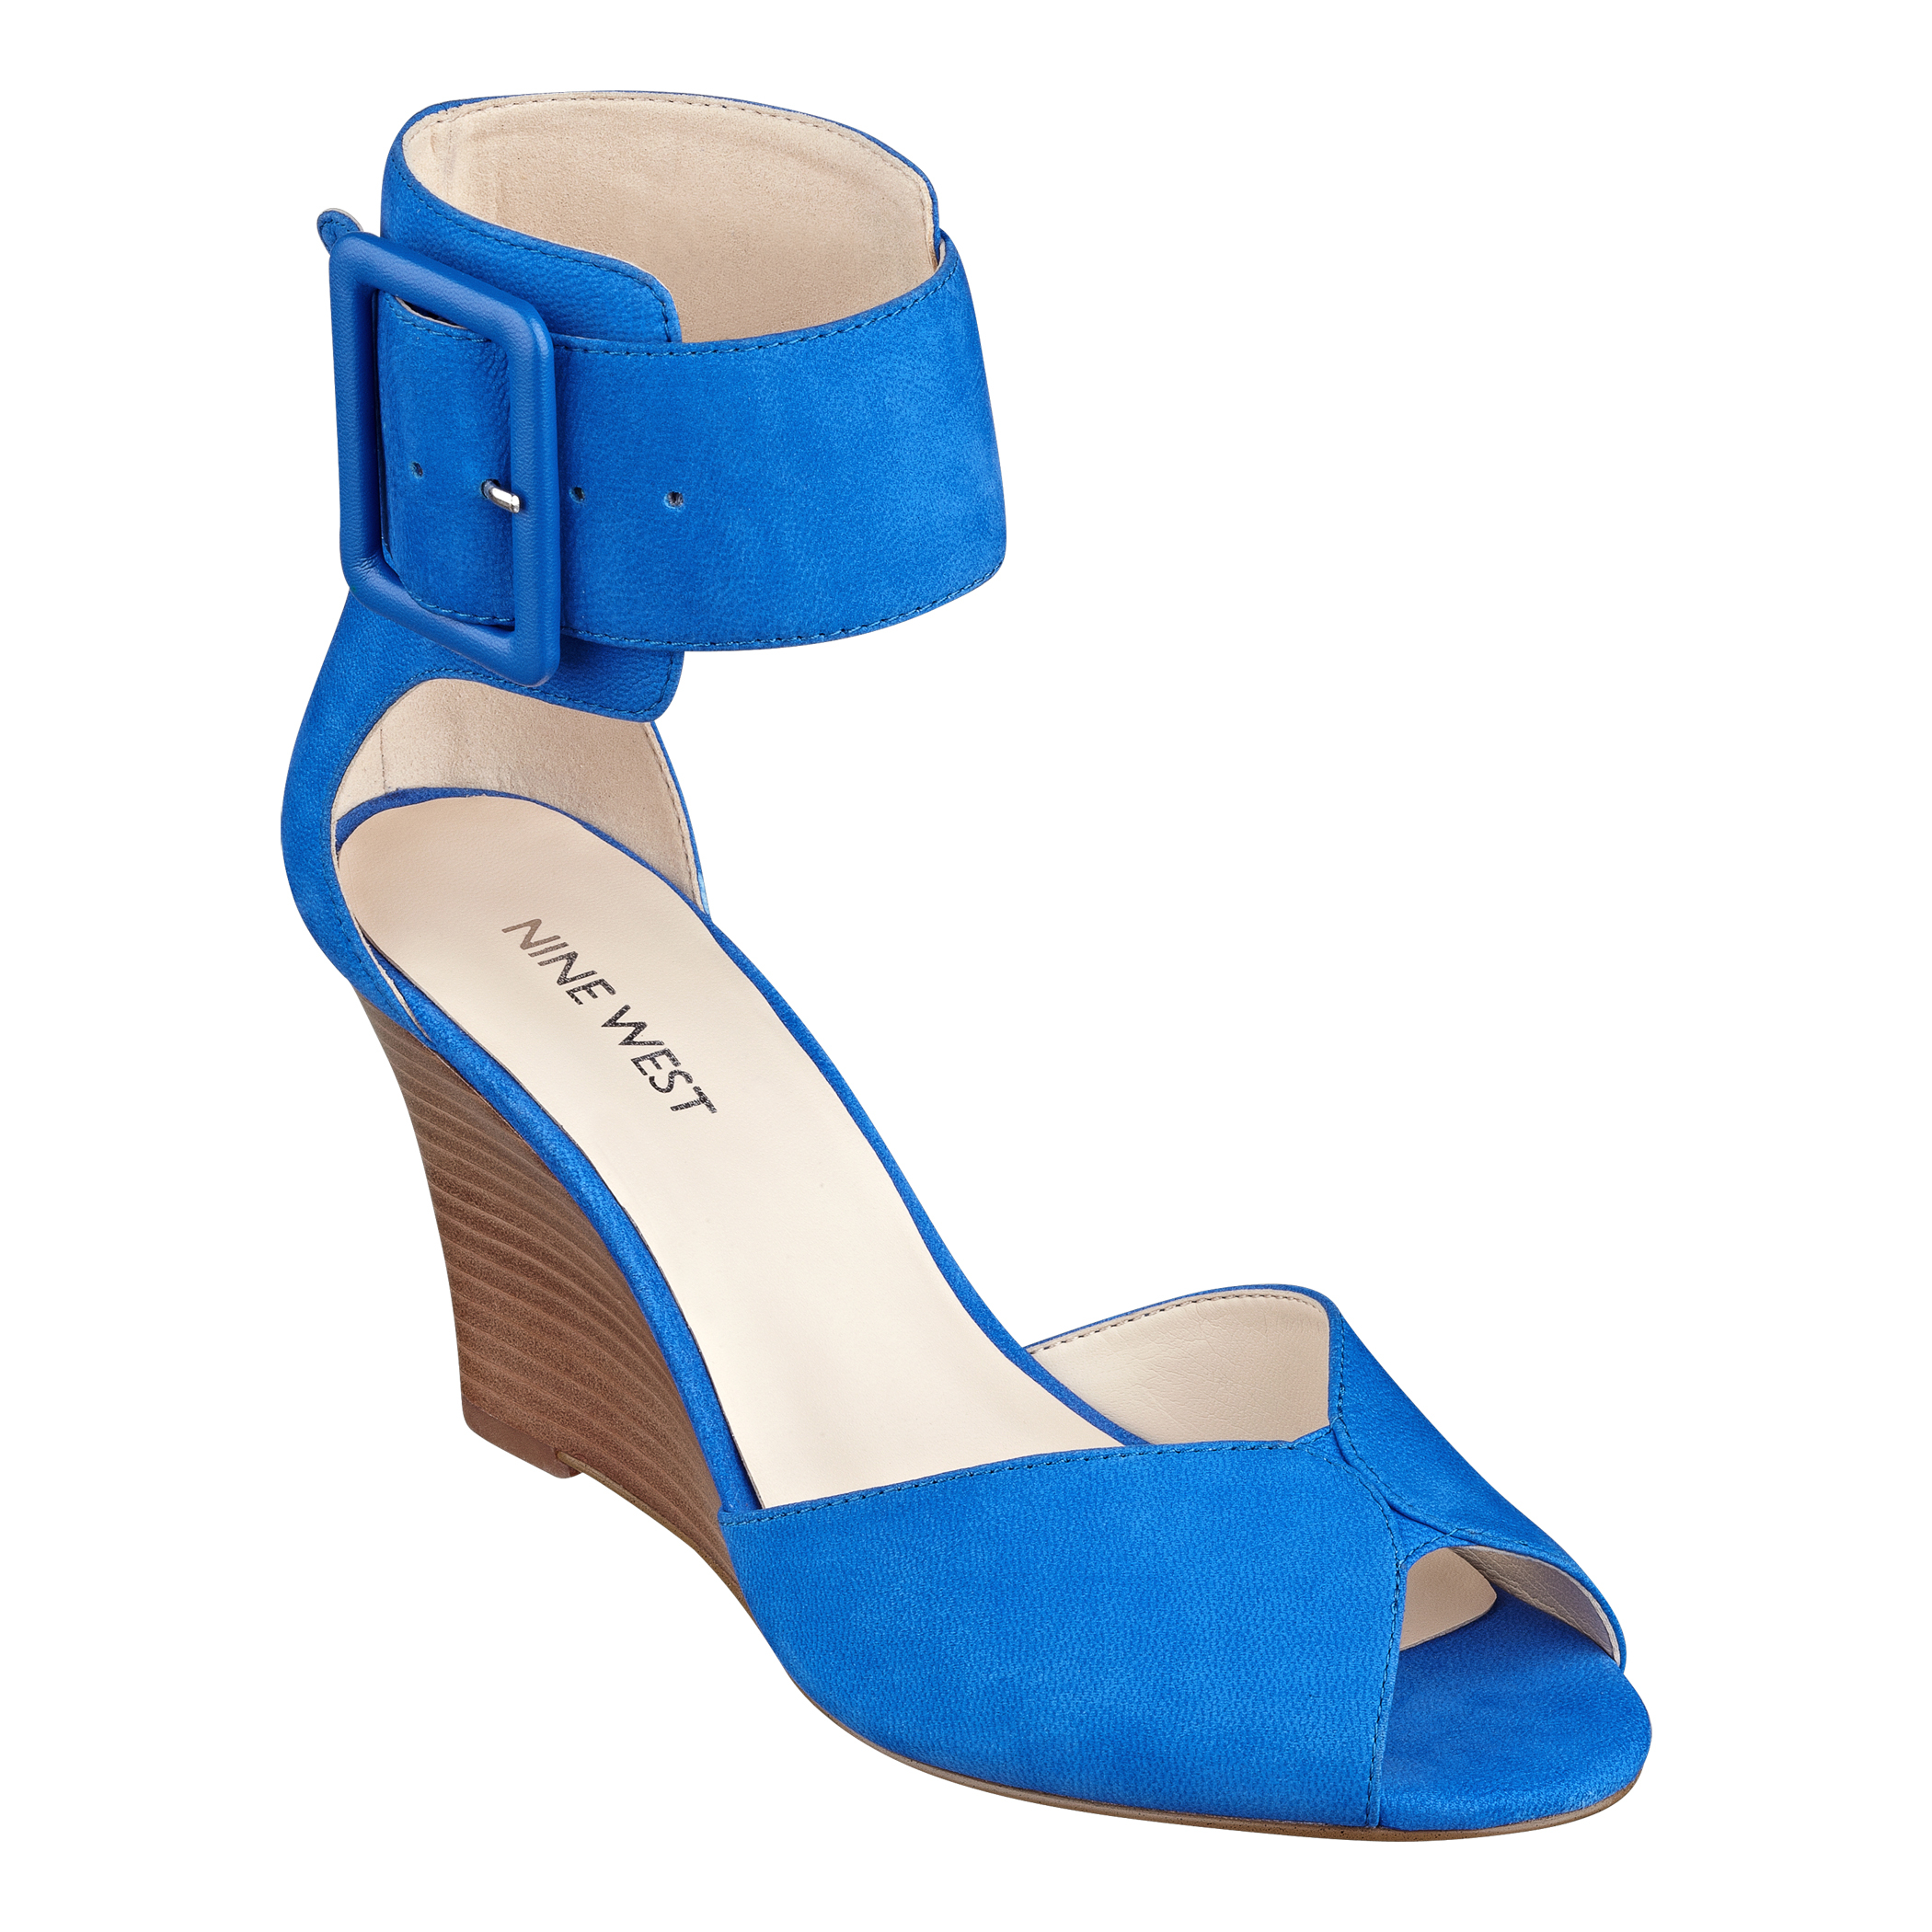 Lyst - Nine West Crudenza Ankle Strap Sandals in Blue